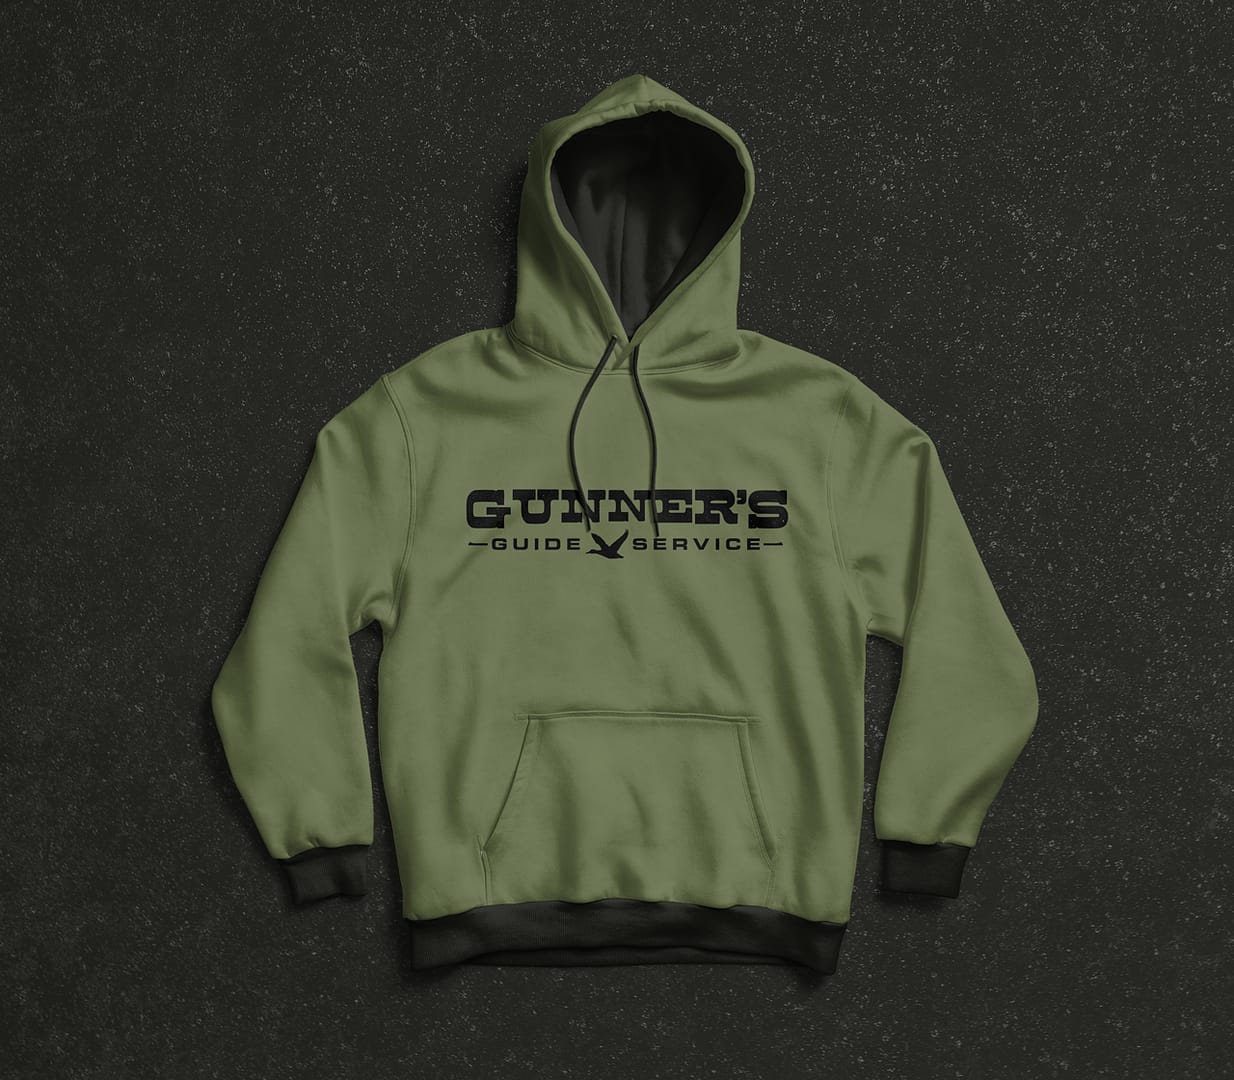 project gunners guide service logo hoodie